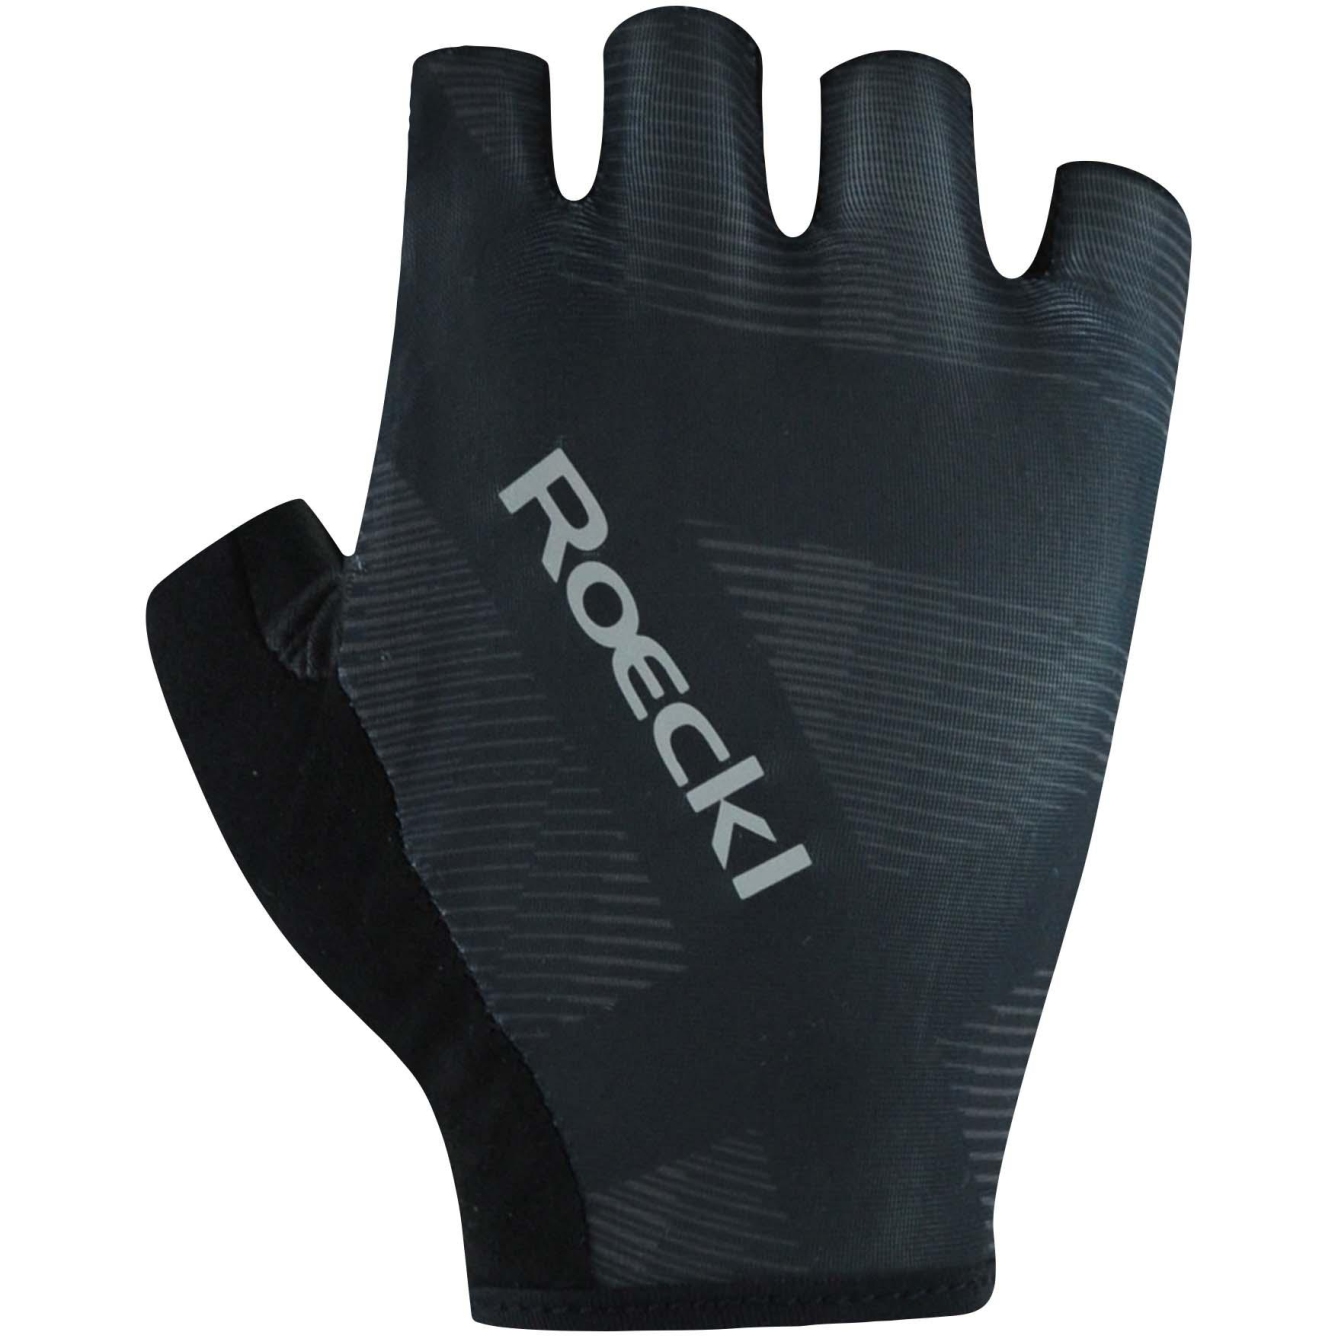 Picture of Roeckl Sports Busano Cycling Gloves - black shadow 9600